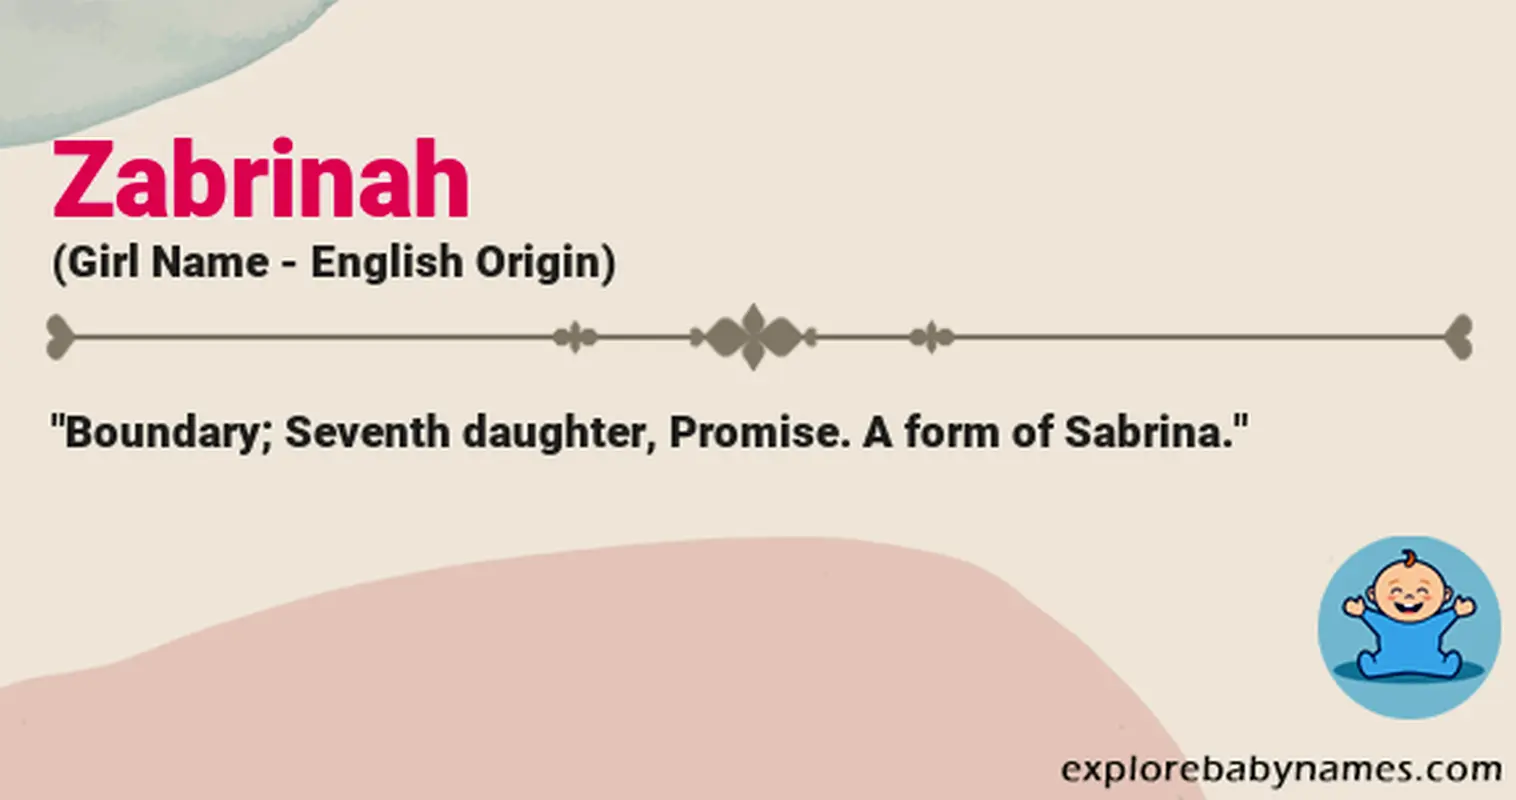 Meaning of Zabrinah